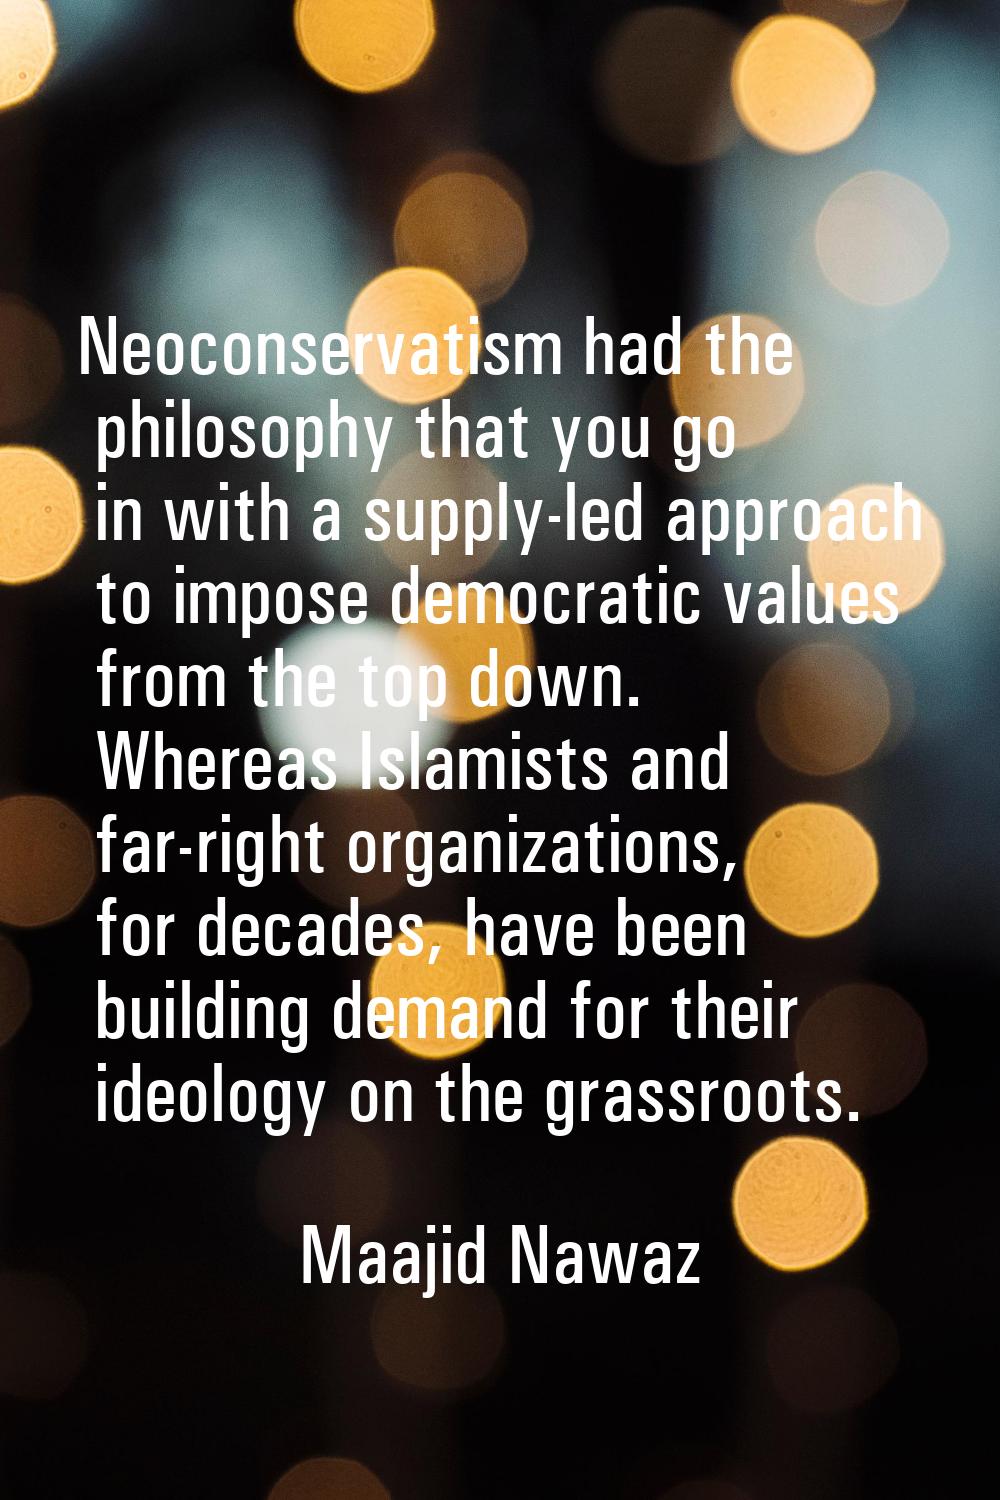 Neoconservatism had the philosophy that you go in with a supply-led approach to impose democratic v